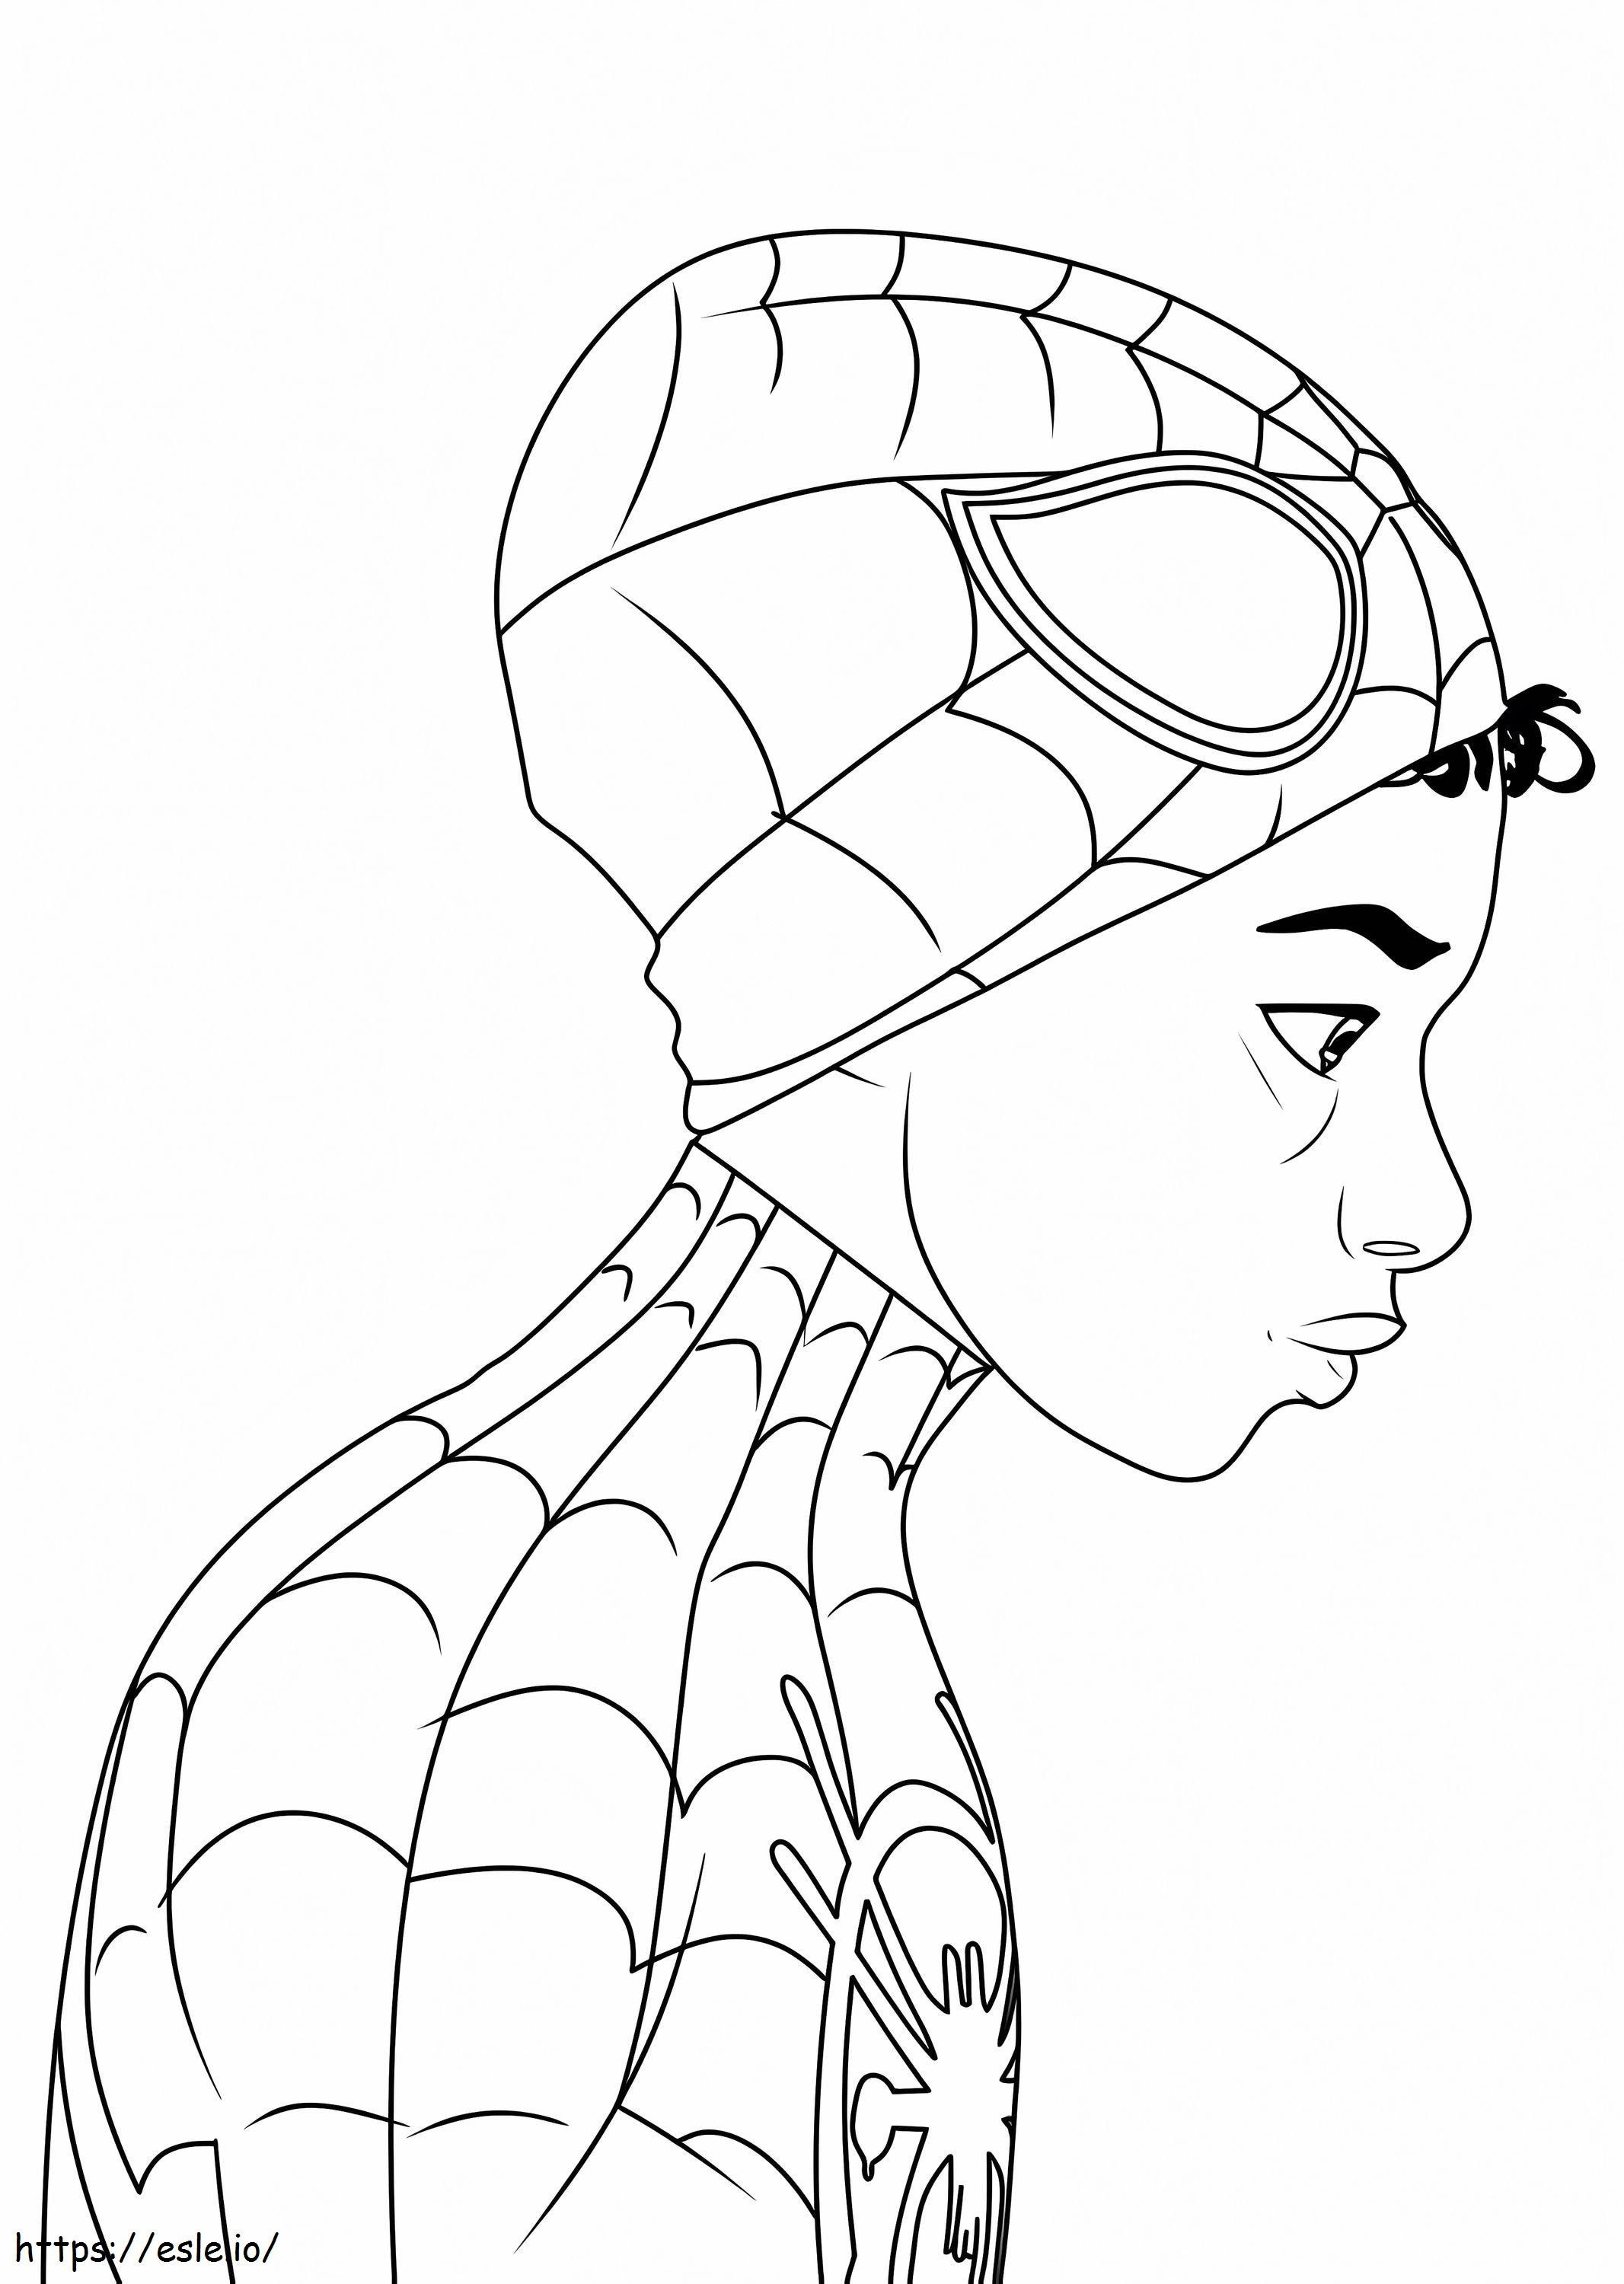 Spider Man Takes Off His Mask coloring page